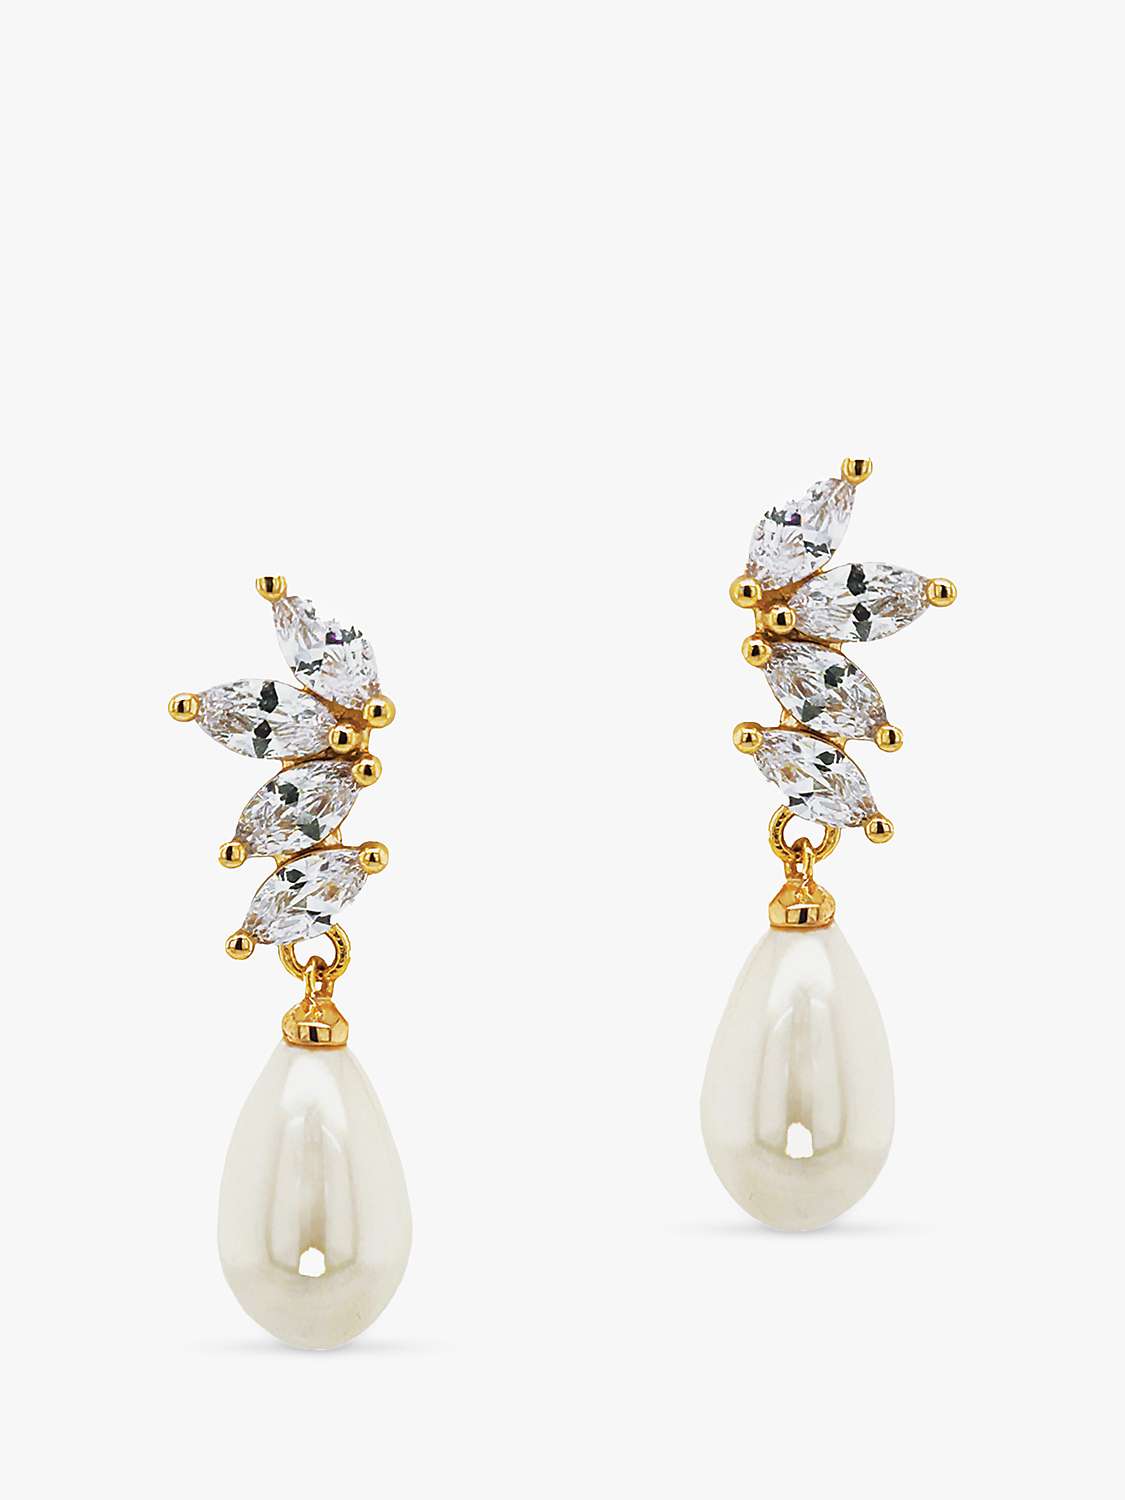 Buy Ivory & Co. Crystal and Faux Pearl Drop Earrings, Gold Online at johnlewis.com